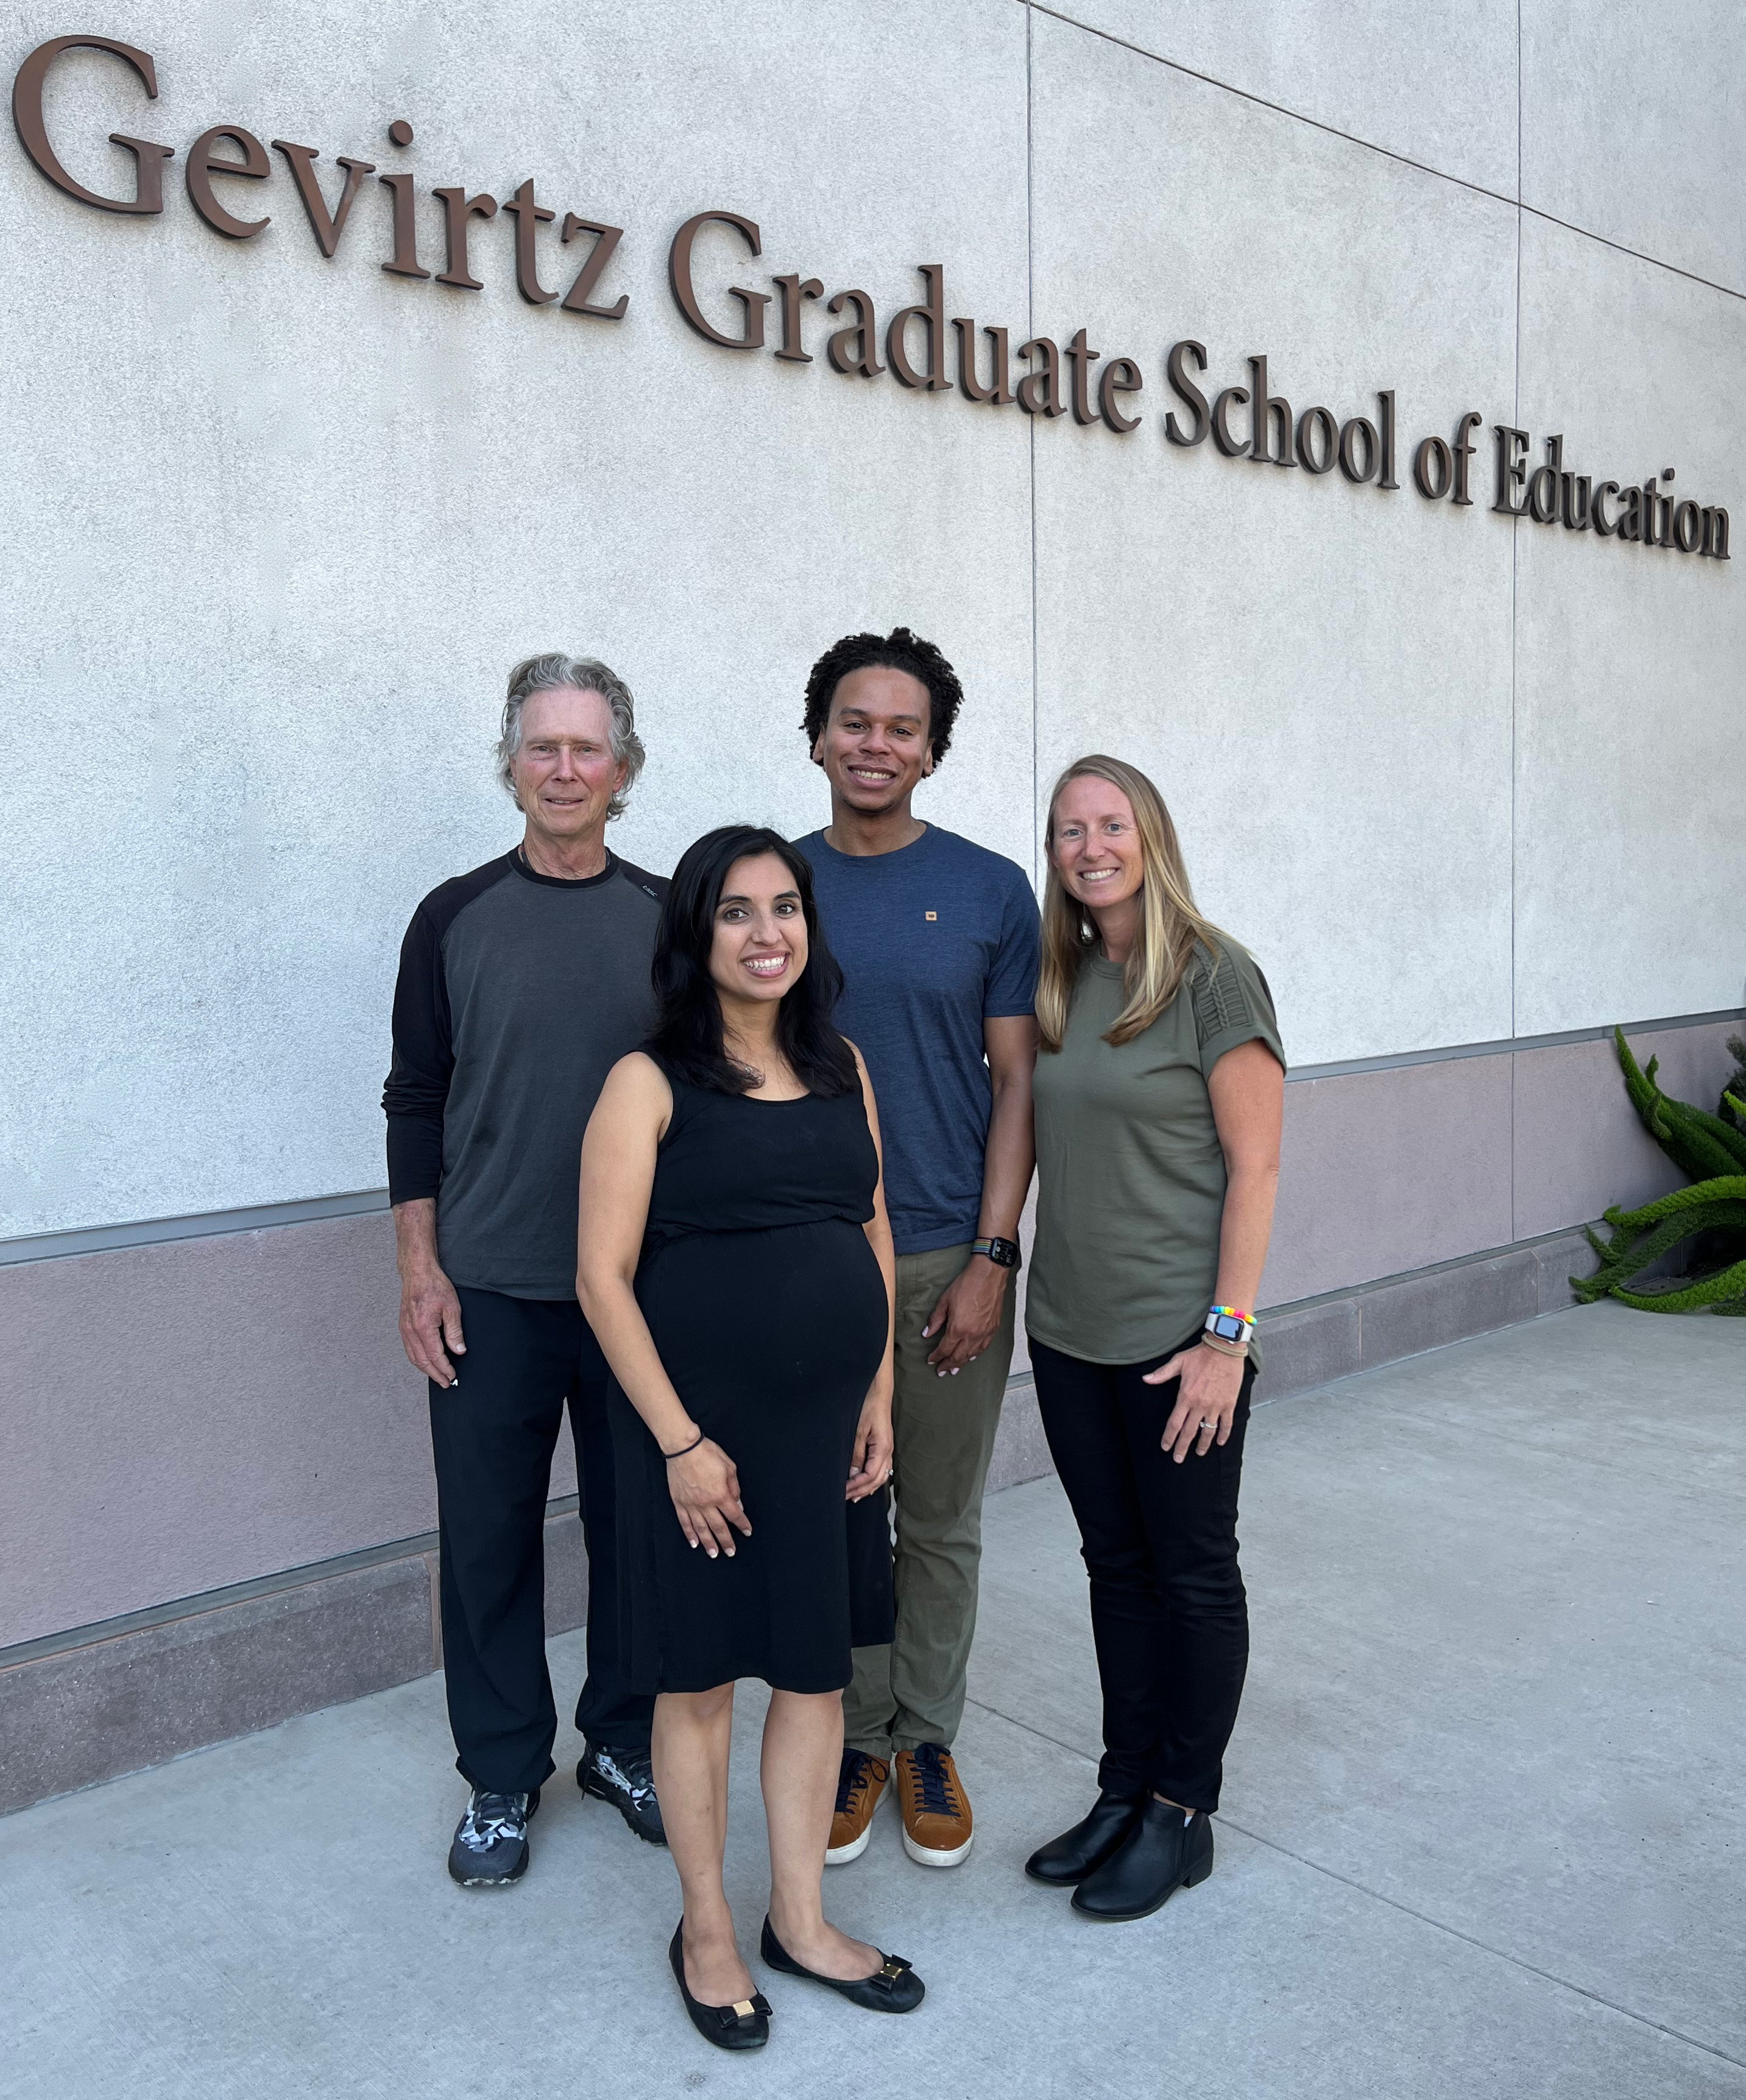 The team from UCSB Gevirtz Graduate School of Education, Department of Counseling, Clinical and School Psychology includes from left to right: Michael Furlong, Ph.D., Distinguished Professor Emeritus; Arlene Ortiz, Ph.D., Assistant Teaching Professor; Jon Goodwin, Ph.D., Assistant Teaching Professor; and Erin Dowdy, Ph.D., Professor.